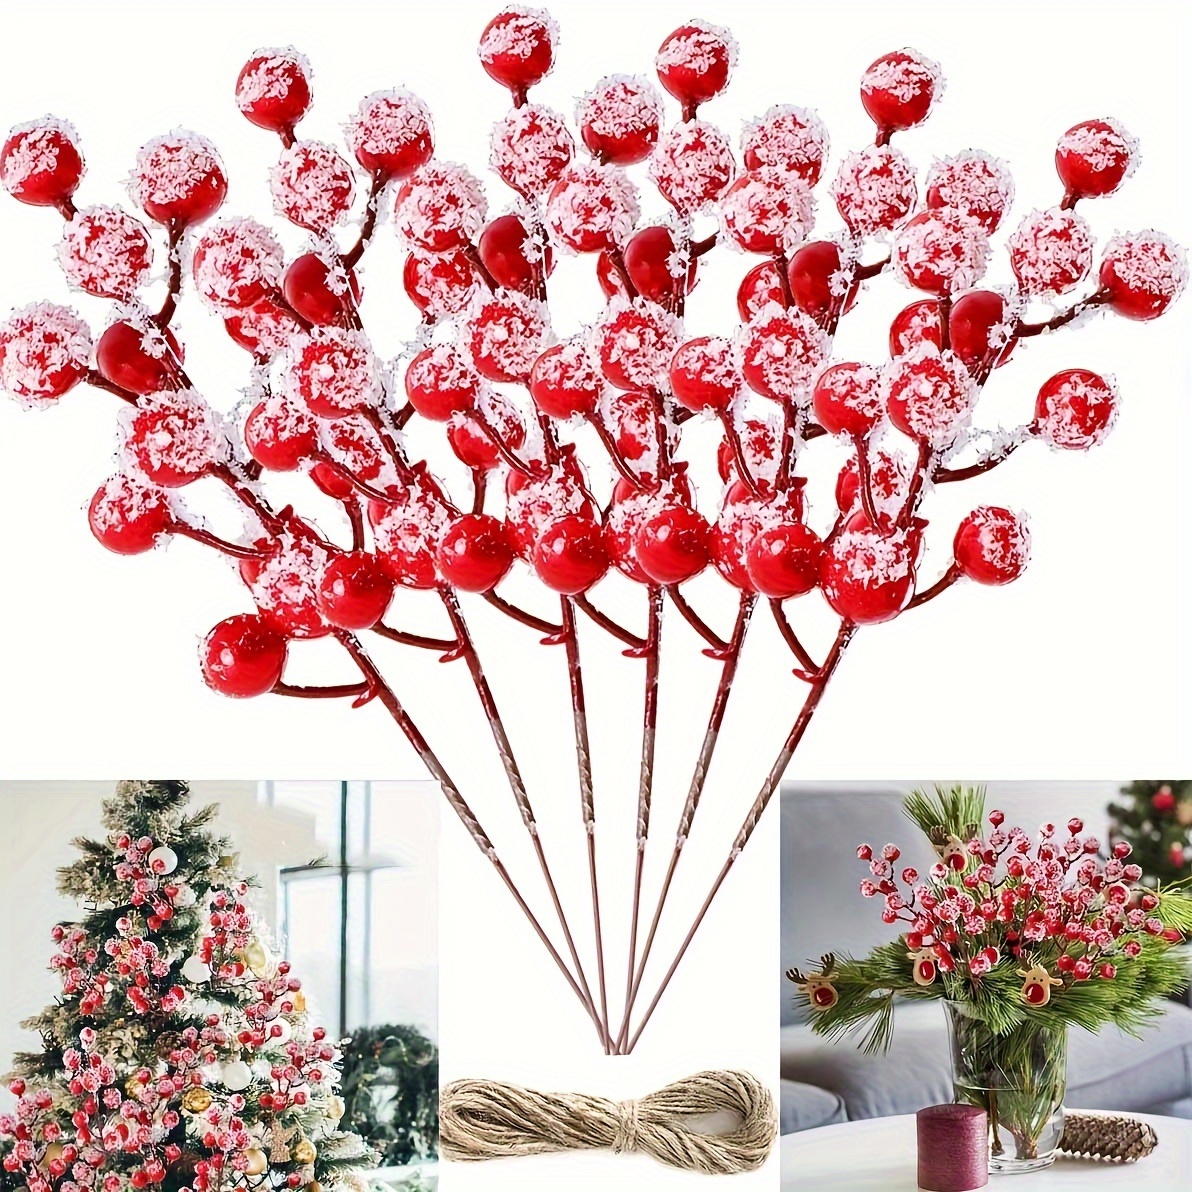 17 Pack Christmas Glitter Berries Stems, 7.8inch Artificial Christmas Picks for Christmas Tree Ornaments, DIY Xmas Wreath, Crafts, Holiday and Home